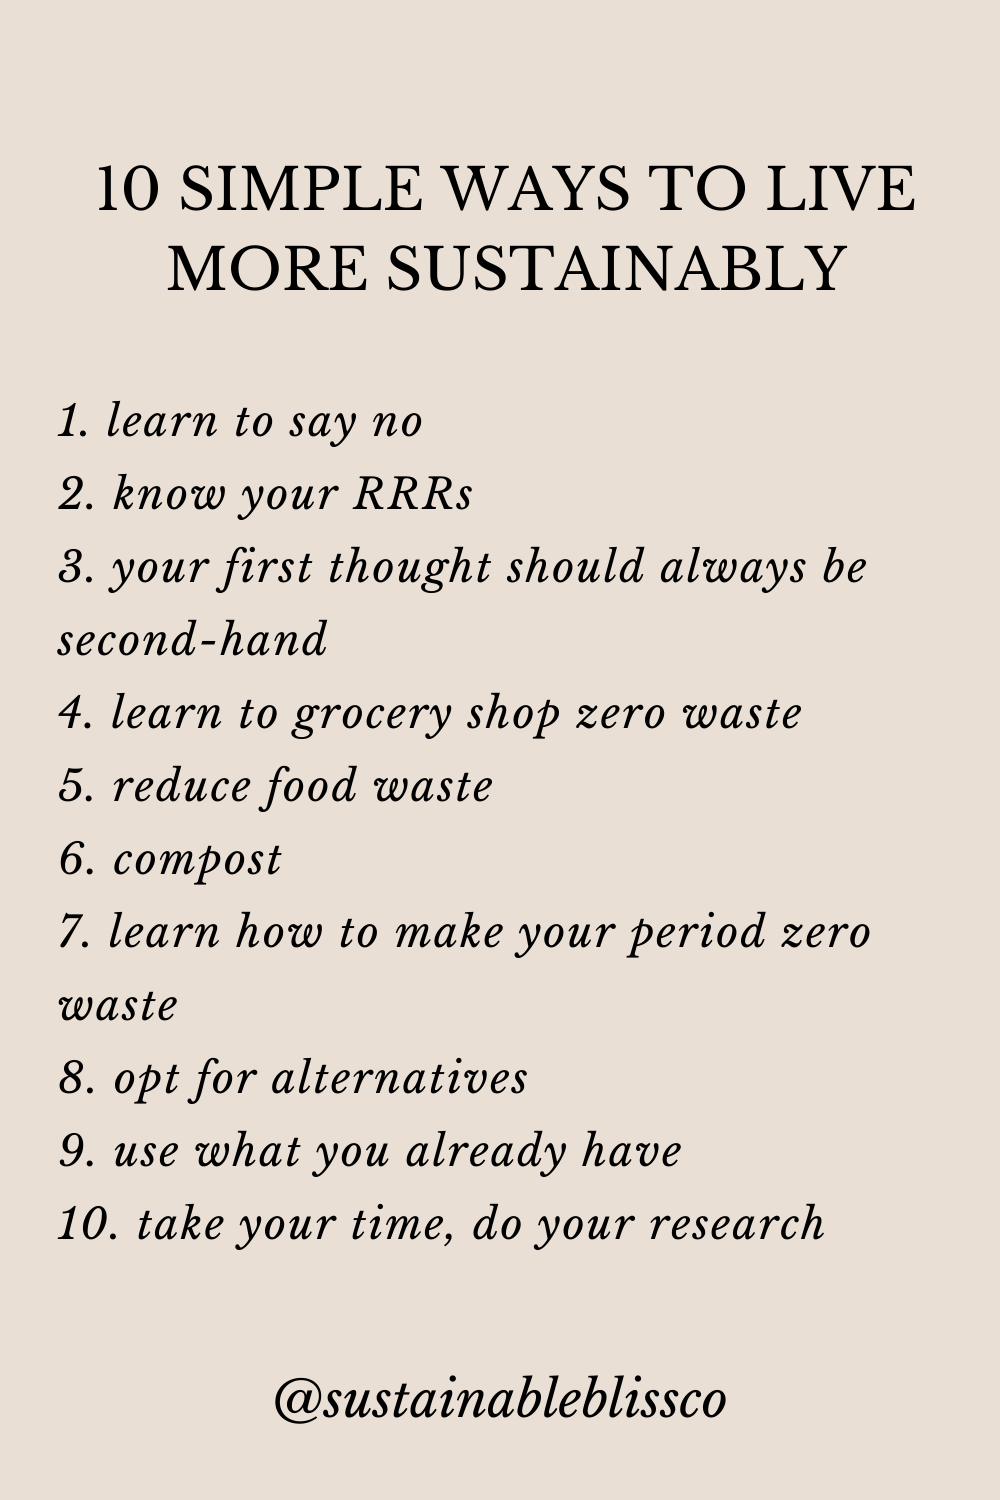 Find Your Alternative: 10 Simple Ways to Live More Sustainably ...